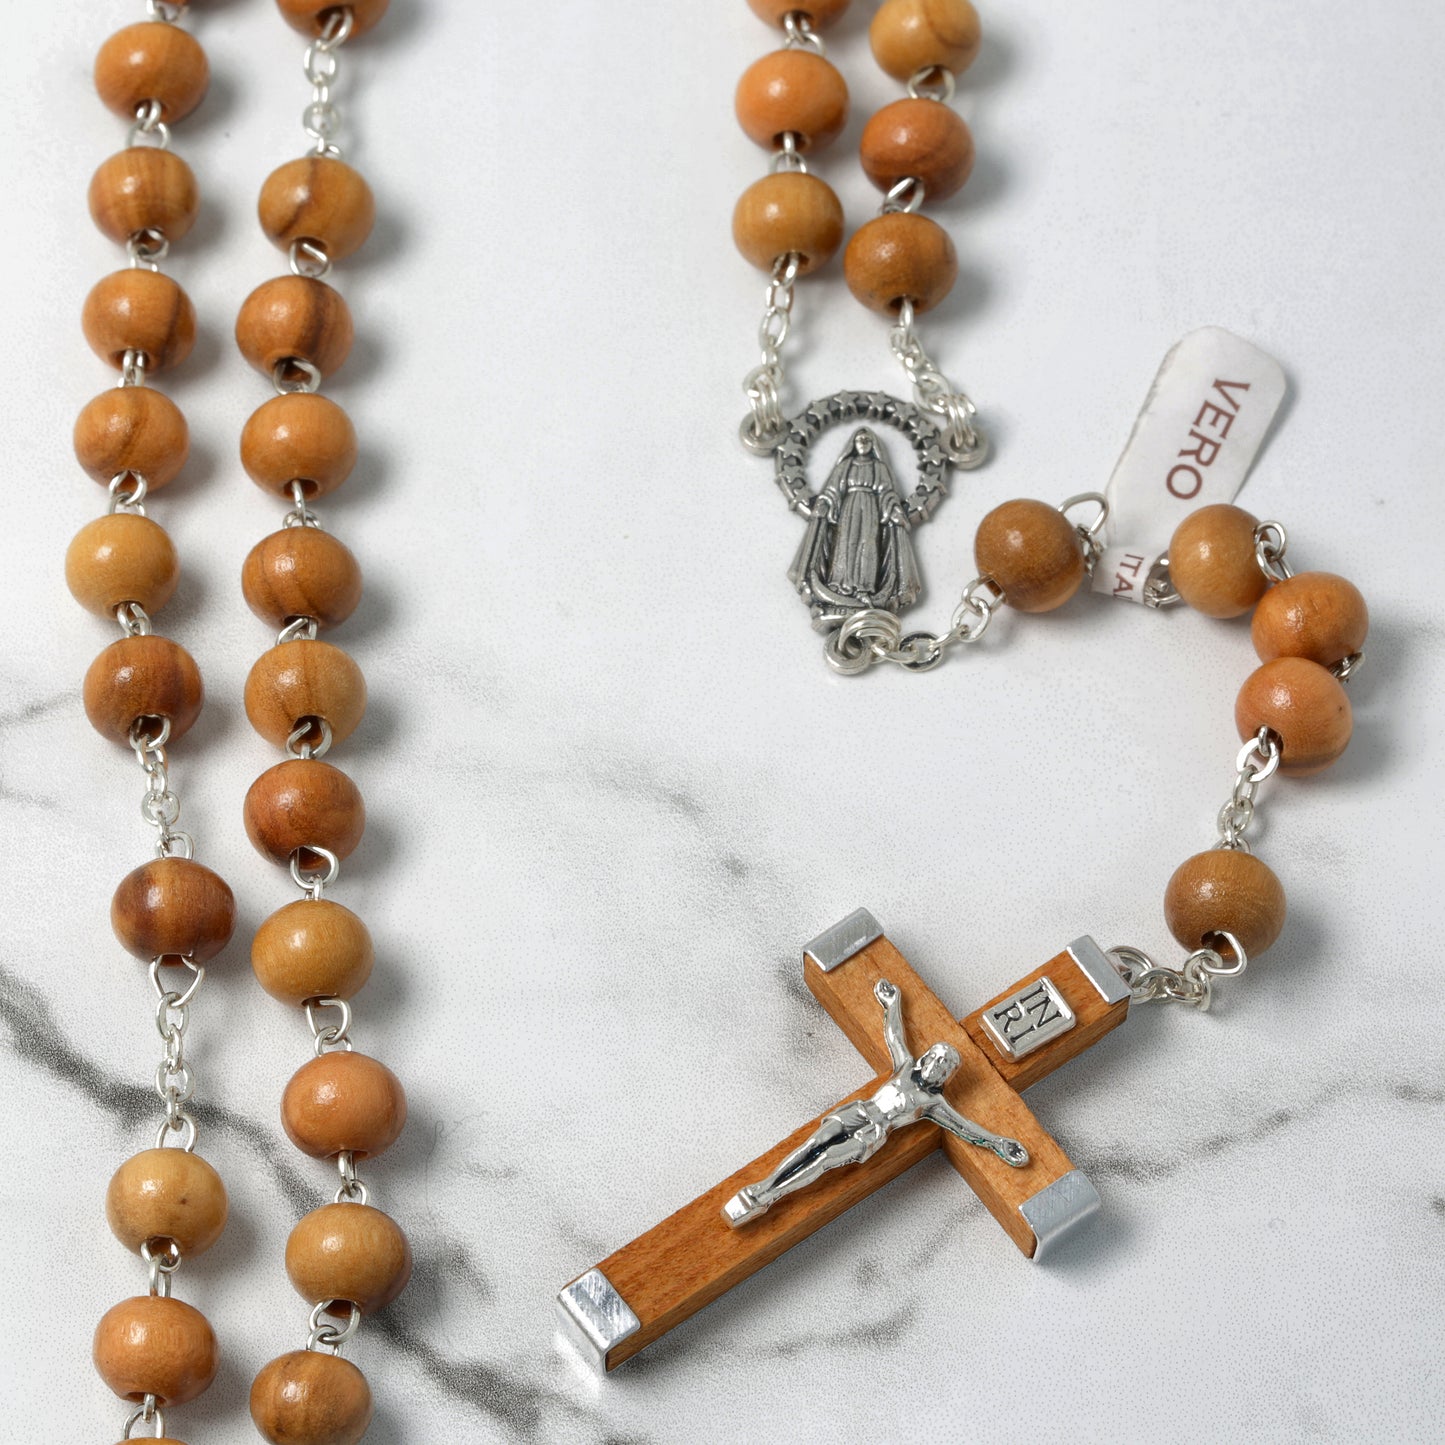 Olive Wood Rosary Vero Miraculous Virgin Souvenirs from Italy